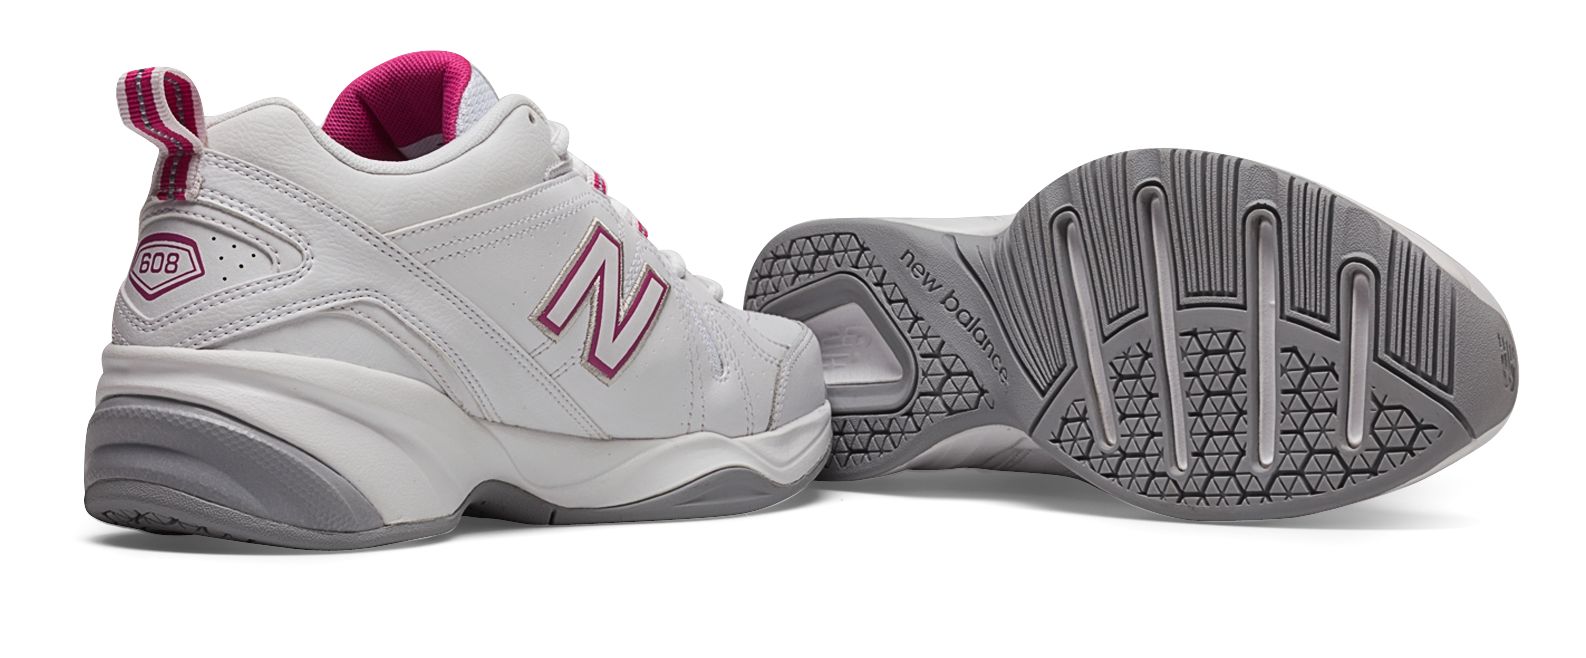 Off on WX608V4P at Joe's New Balance Outlet